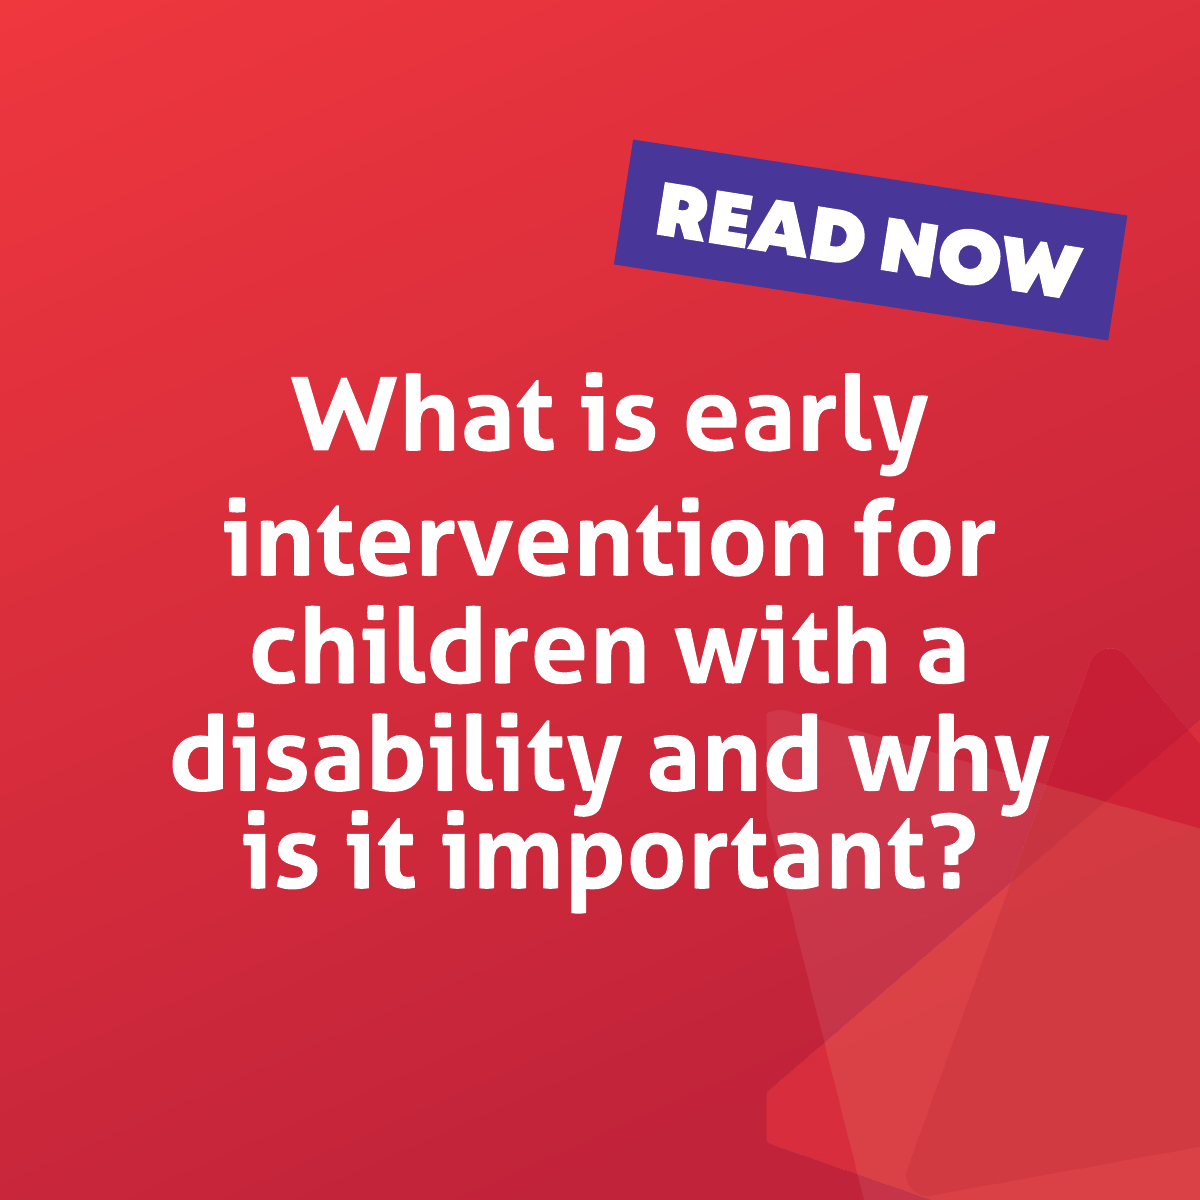 What is early intervention?